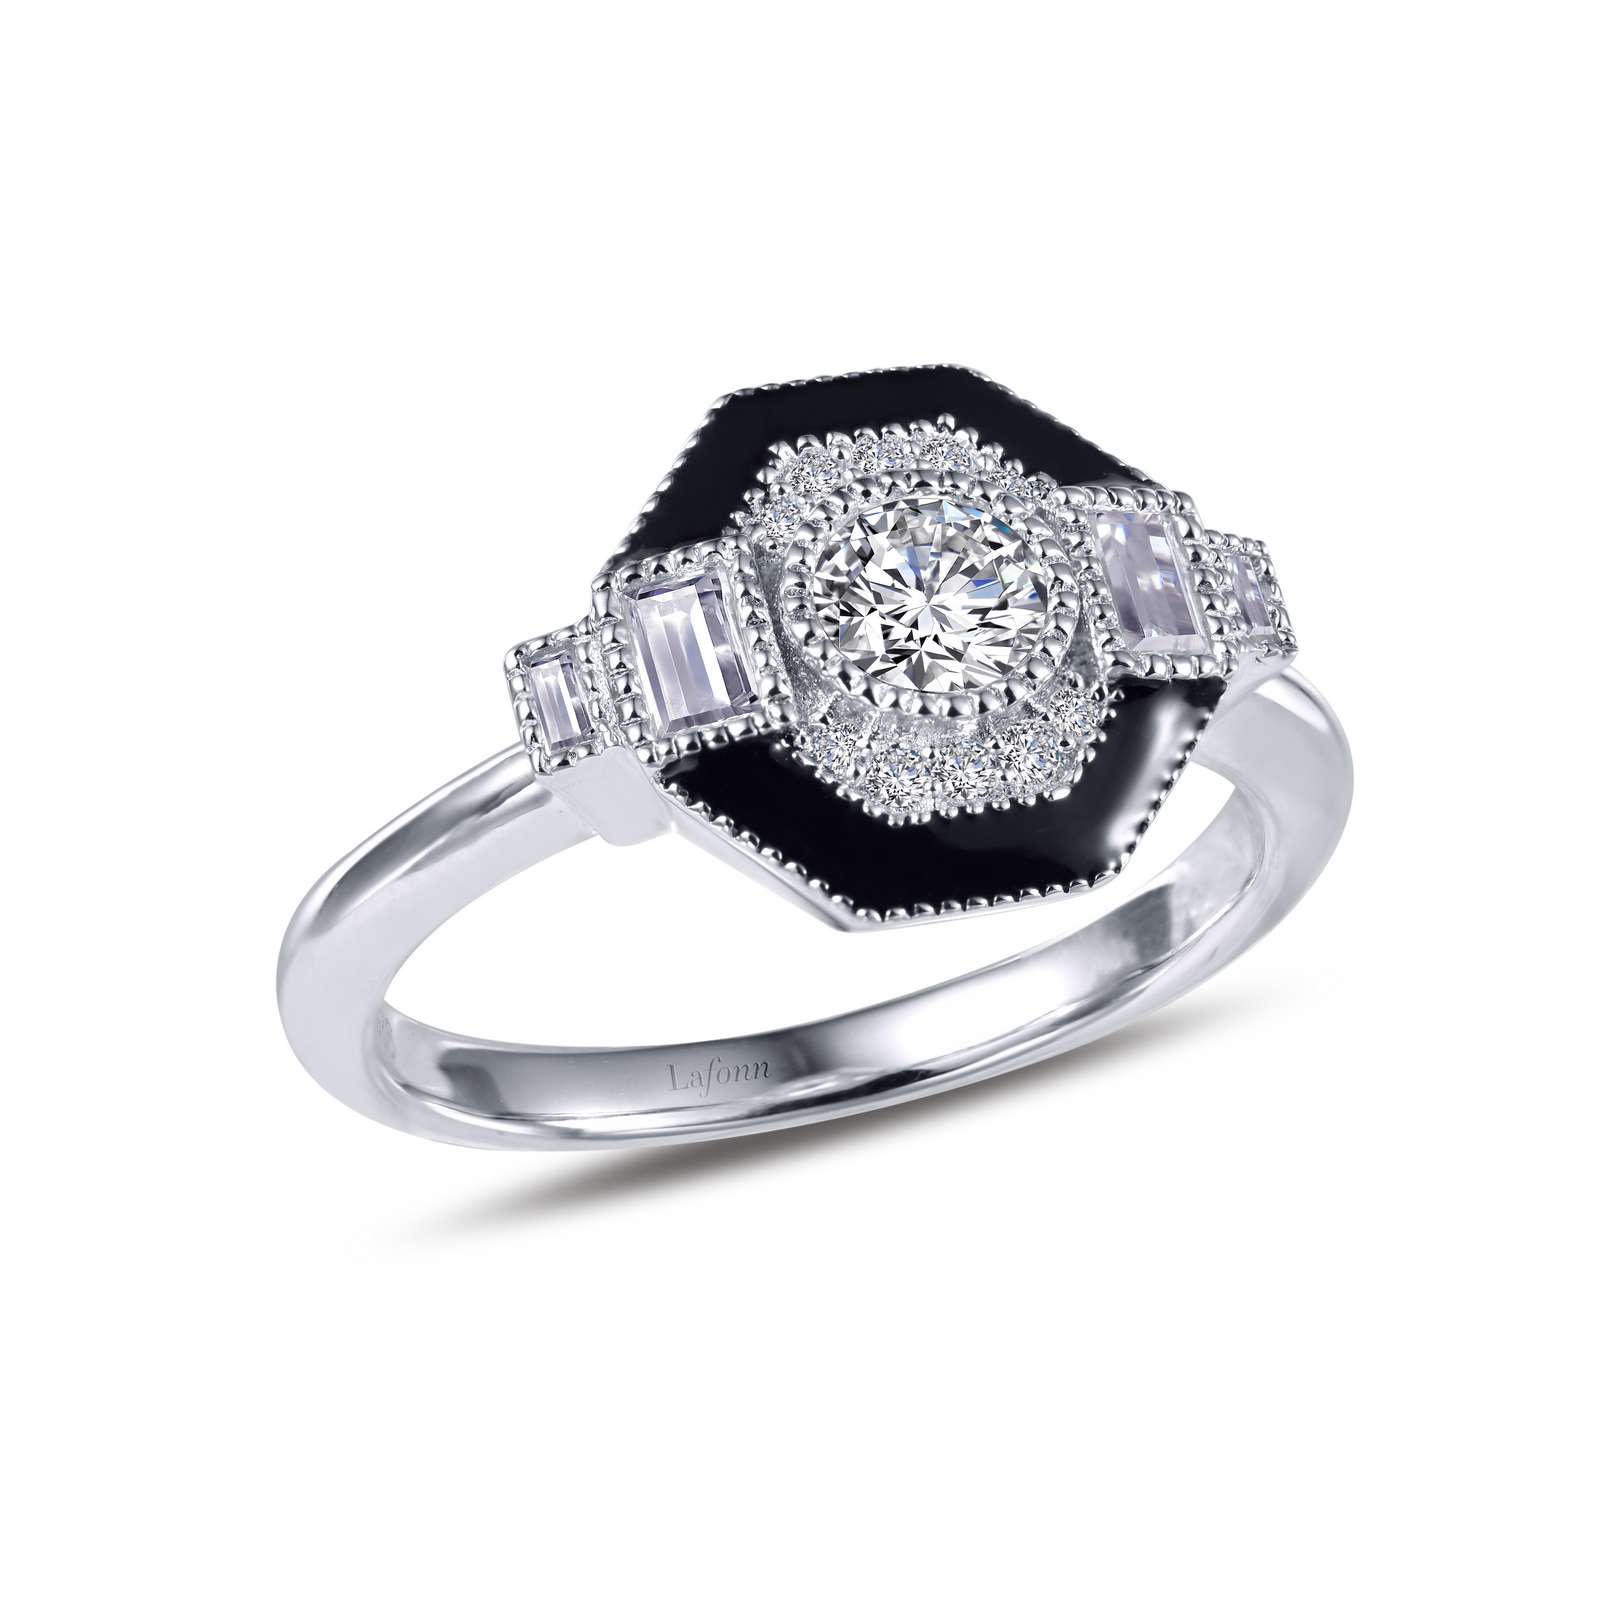 Vintage Inspired Engagement Ring Griner Jewelry Co. Moultrie, GA